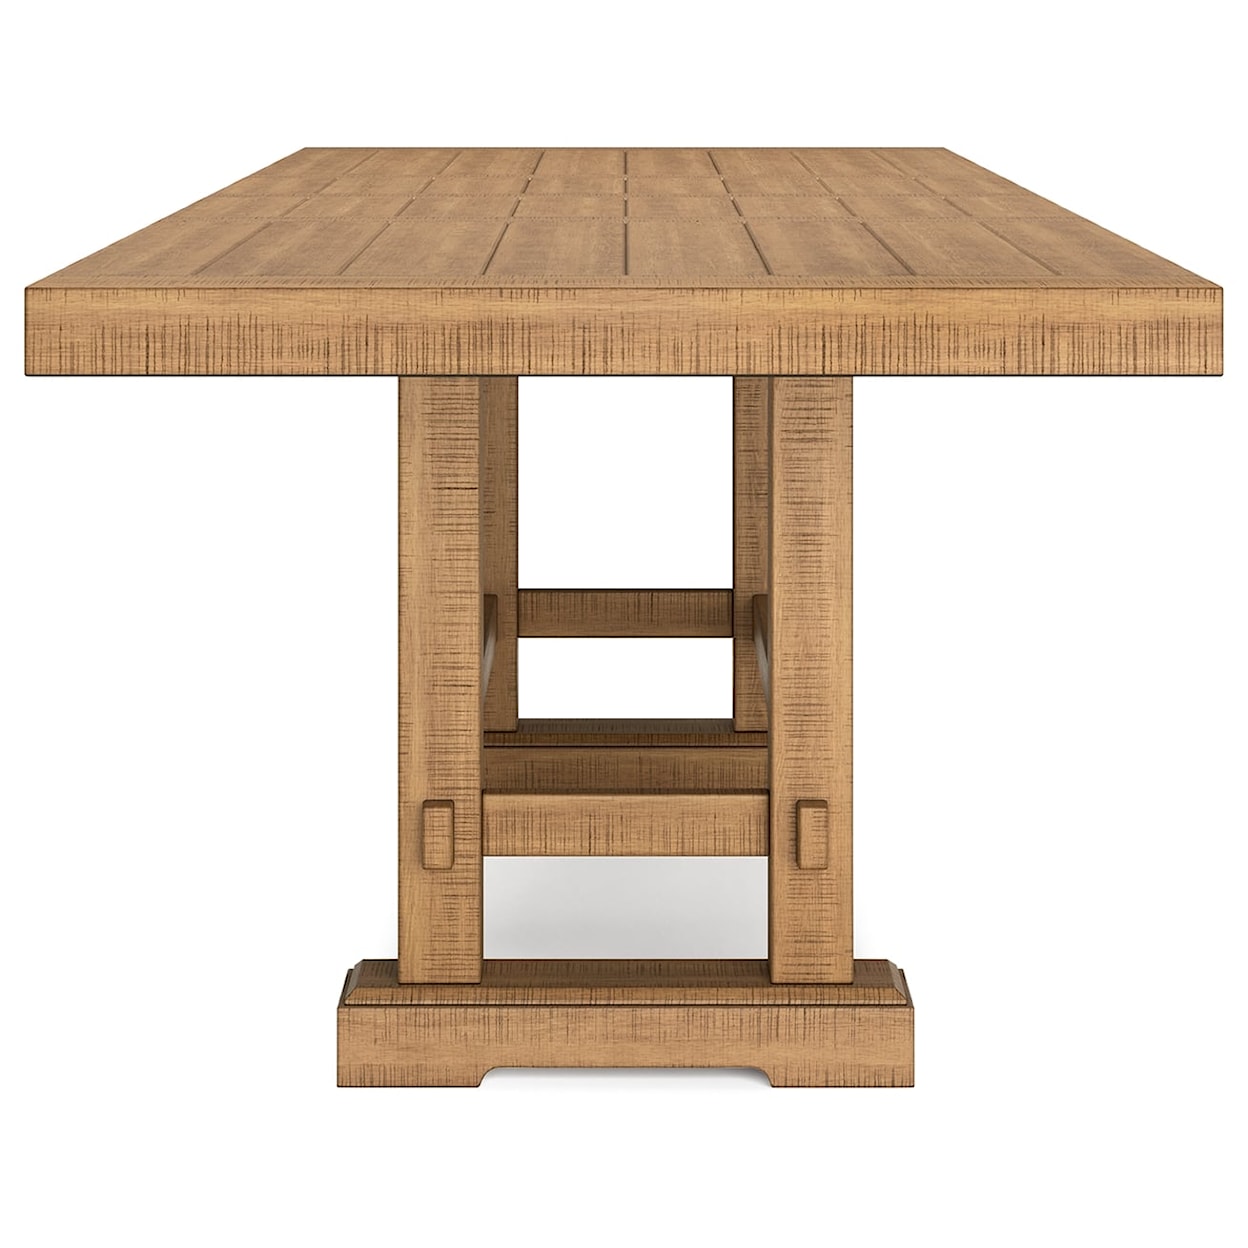 Benchcraft Havonplane Counter Height Dining Extension Table